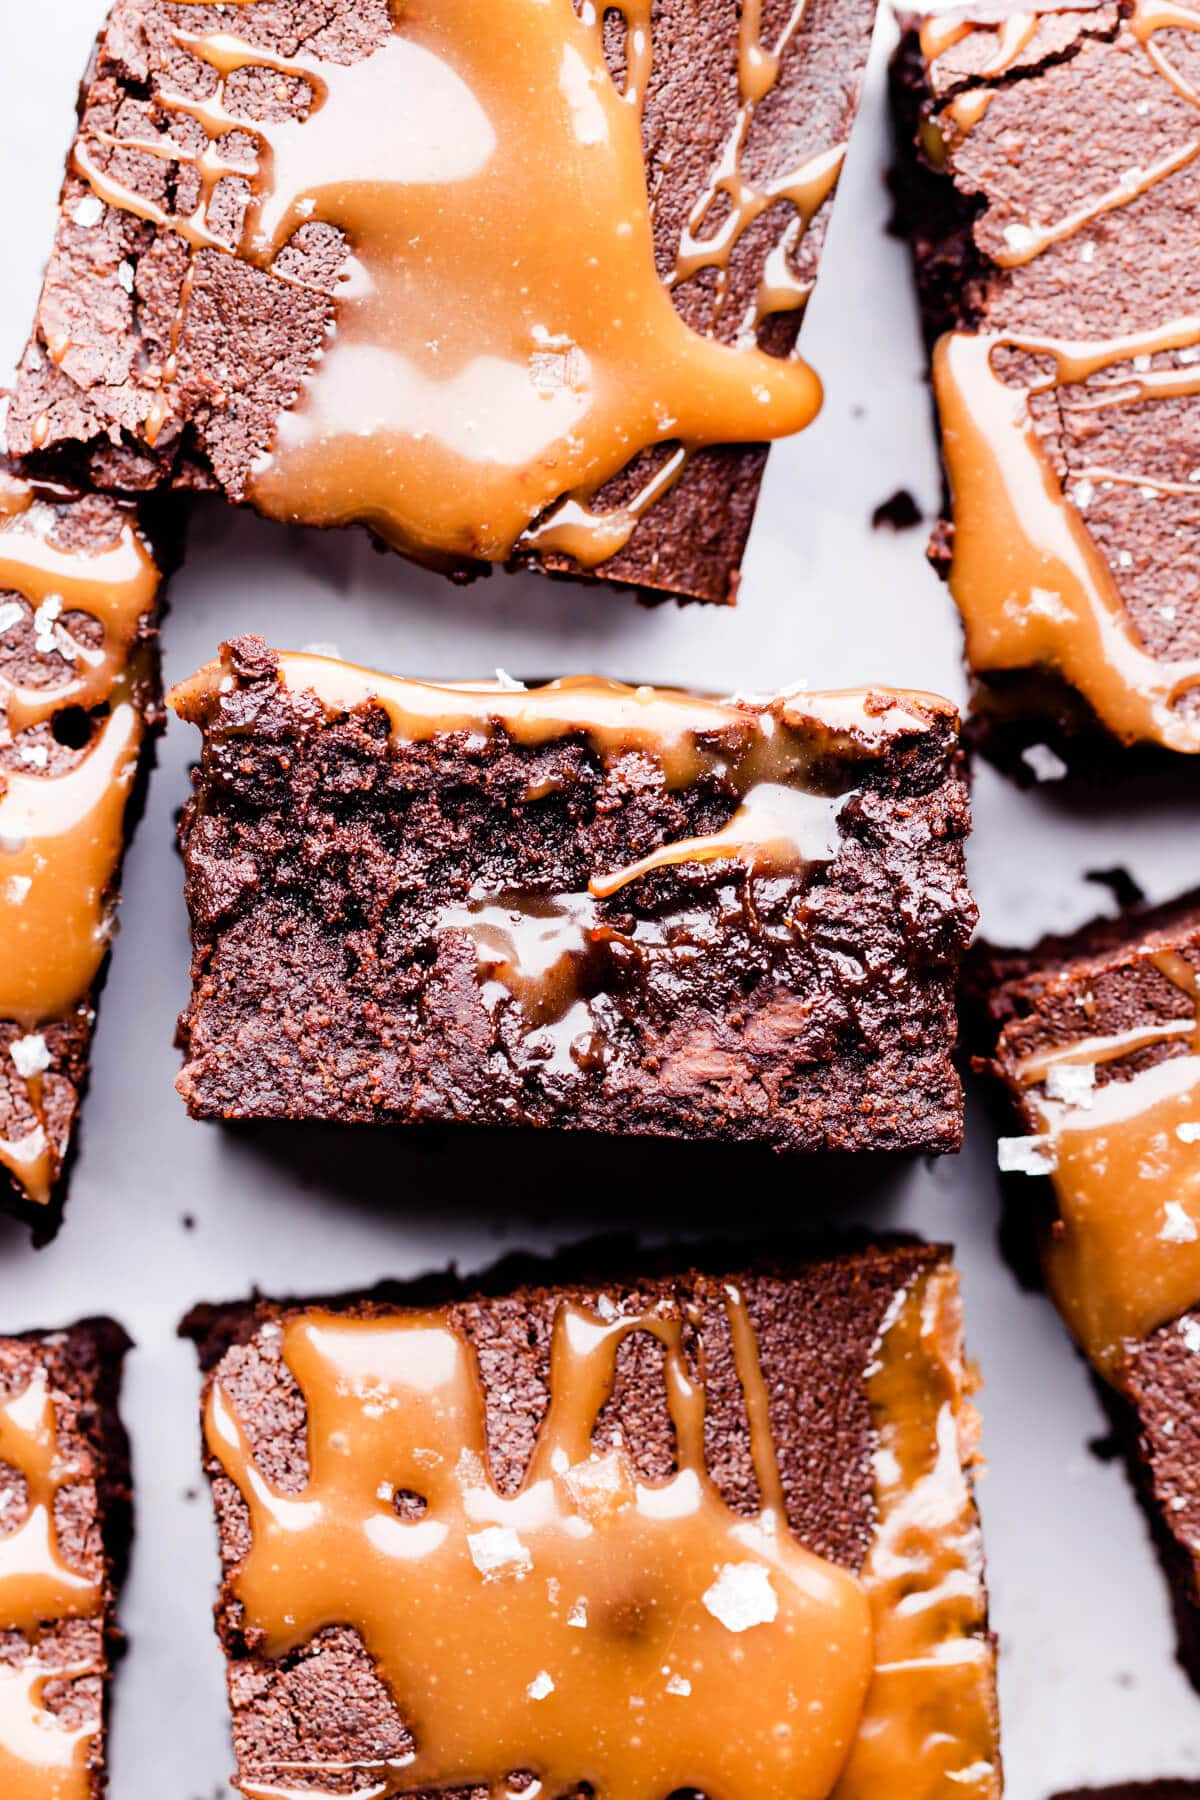 fudgy chocolate stout brownie with salted caramel.